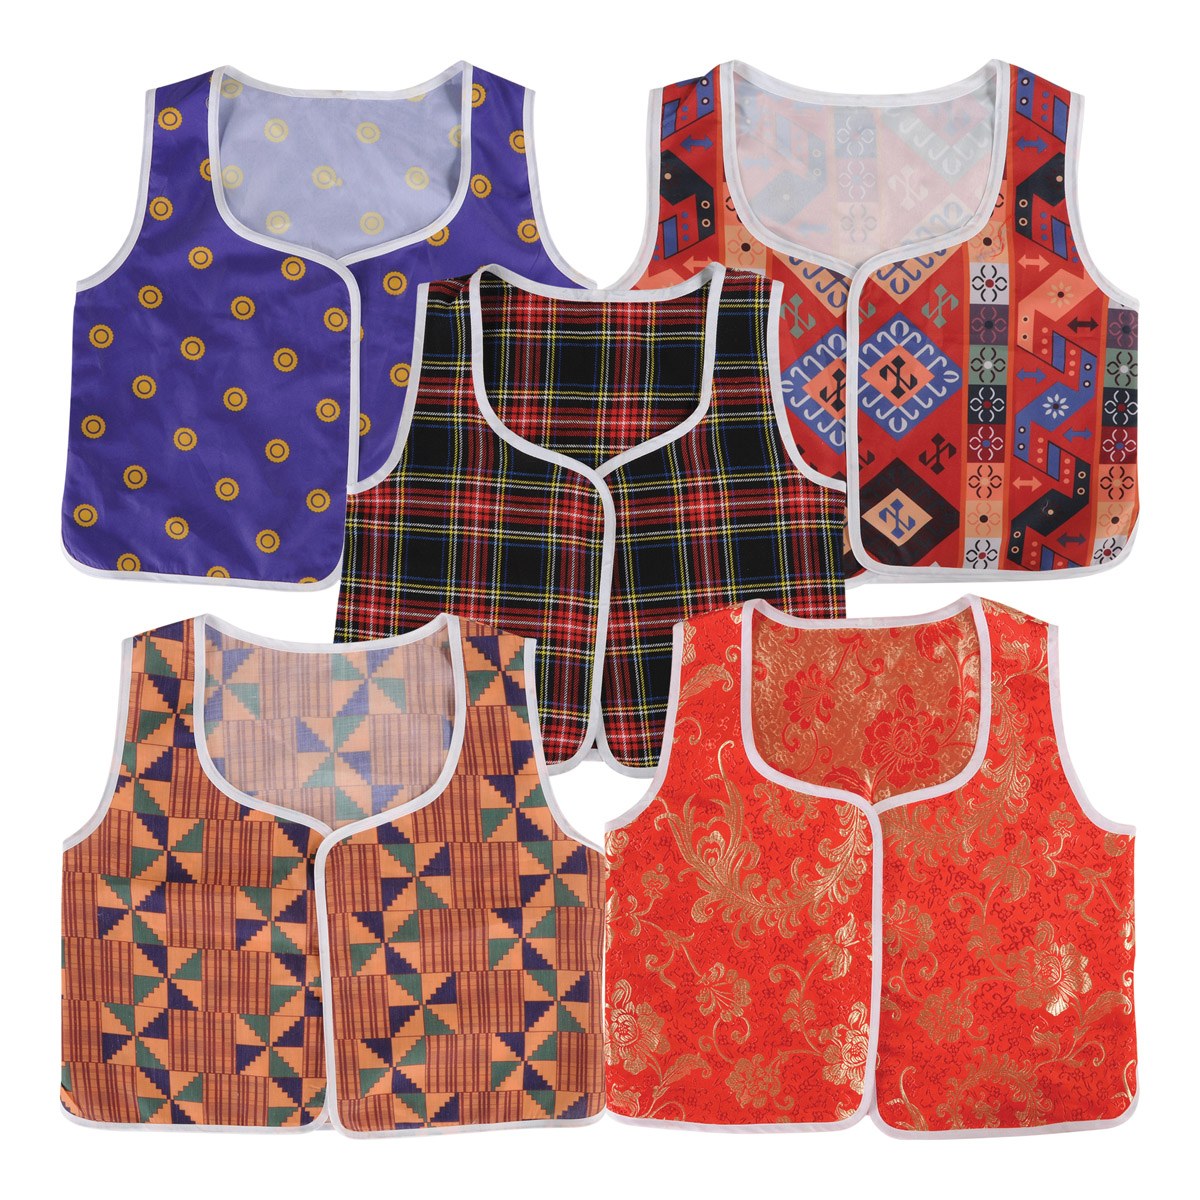 Kaplan Early Learning Company Toddler Multicultural Vests - Set of 5